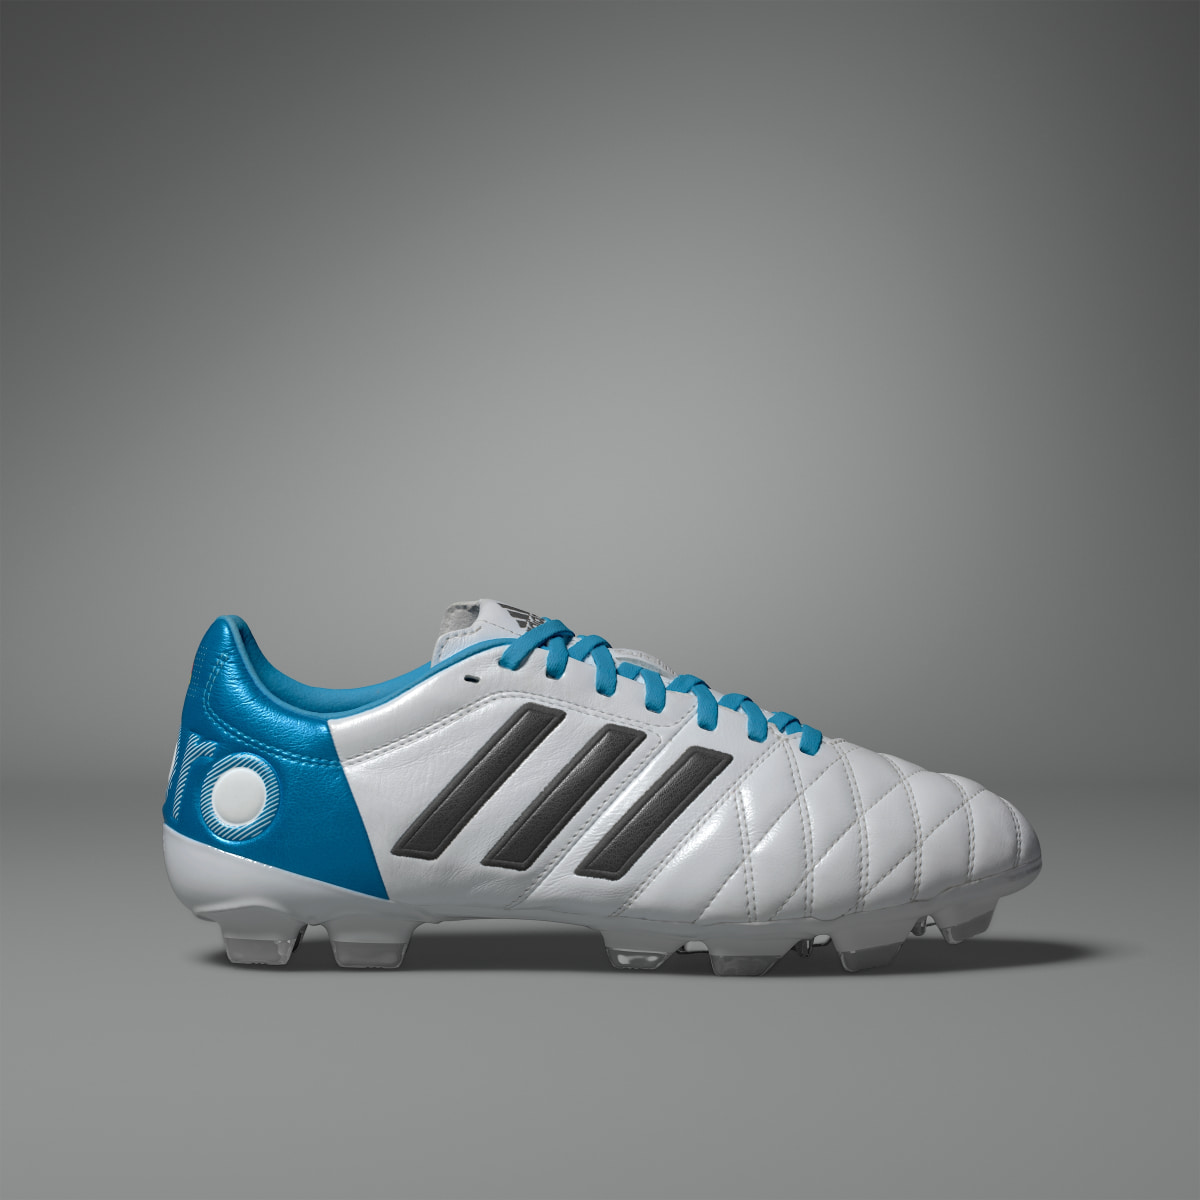 Adidas 11Pro Toni Kroos Firm Ground Boots. 4